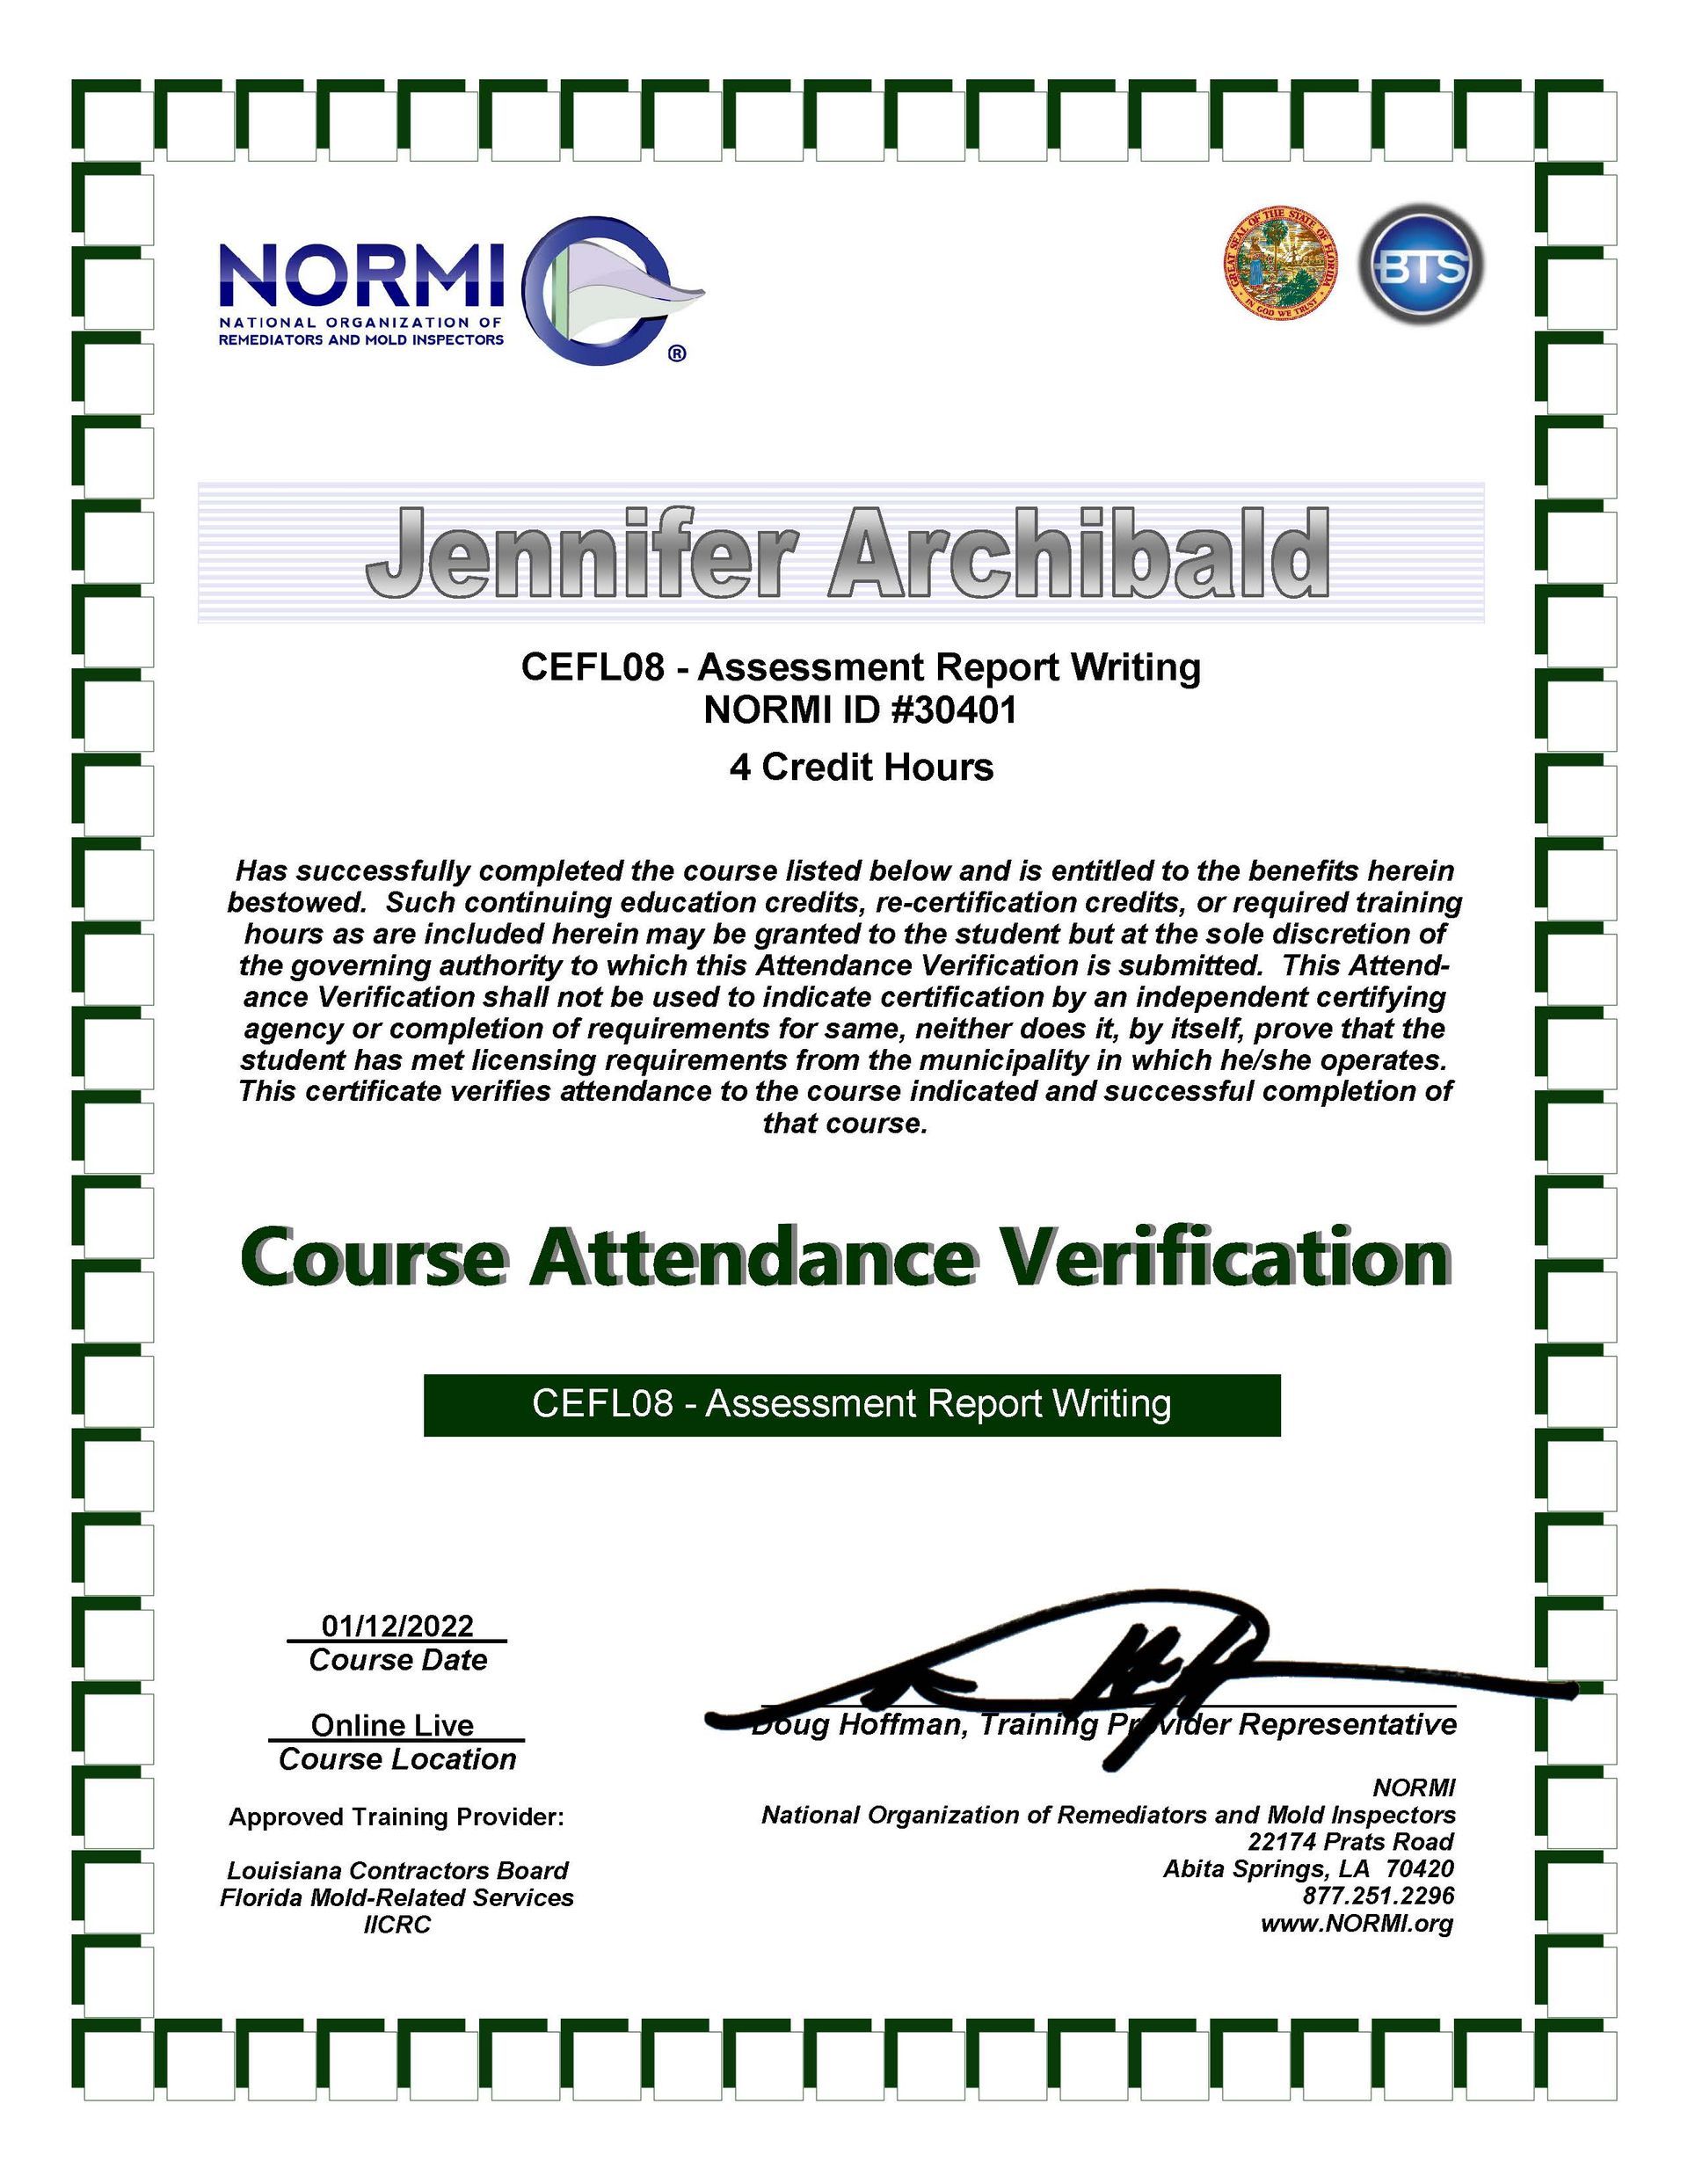 jennifer archibald has successfully completed the course listed below and is entitled to the benefits herein bestowed